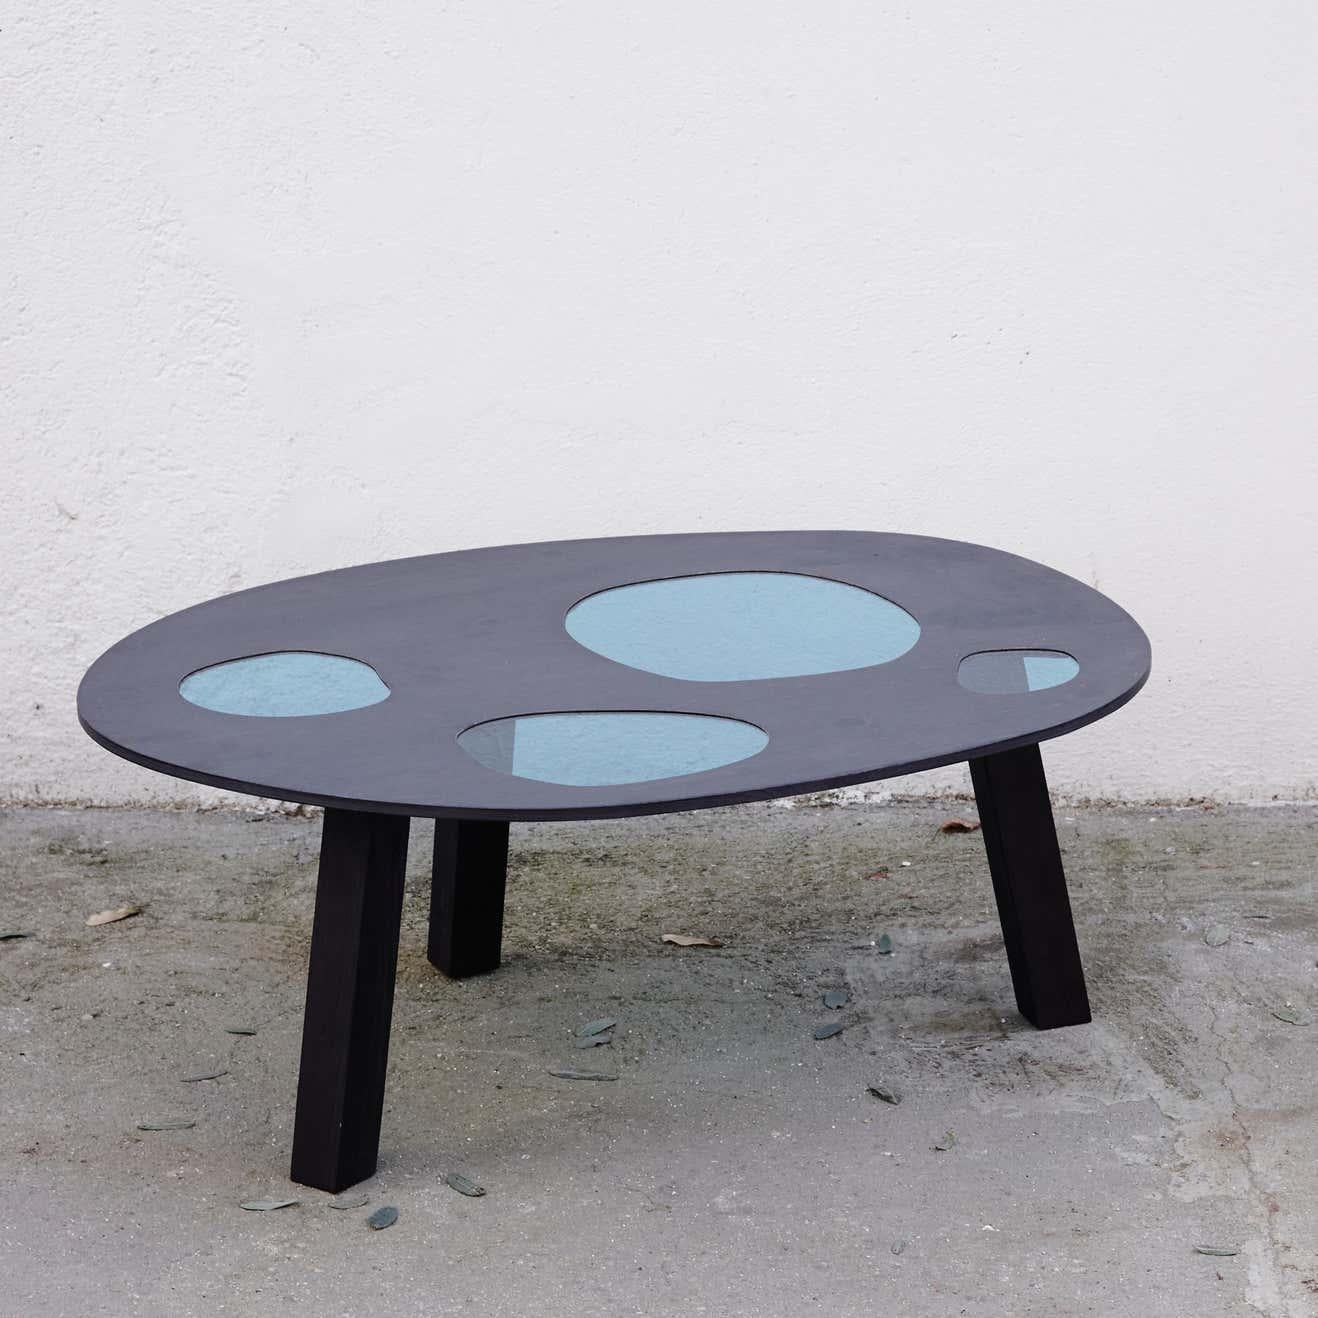 Prototype table designed by Fernando and Humberto Campana in 2016
Manufactured in Spain by BD Barcelona design.

Unique piece.

Humberto Campana, 1953 and Fernando Campana, 1961 are Brazilian designers.
In 1983, the two brothers teamed up to